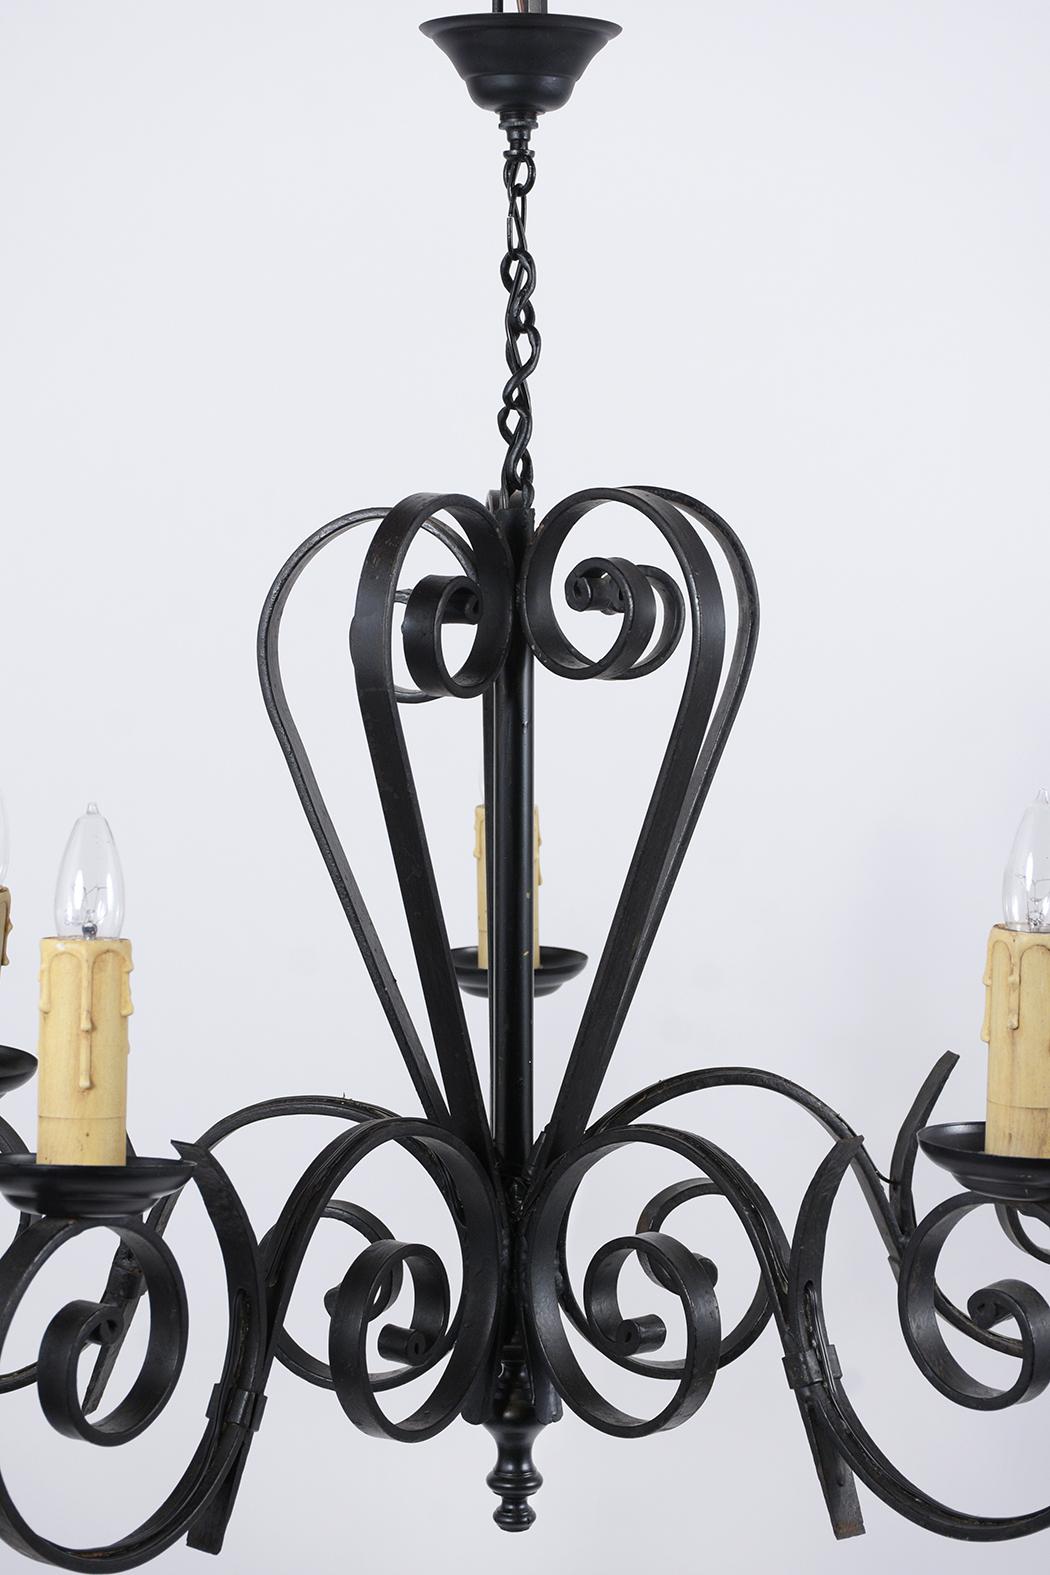 Mid-20th Century French Iron Chandelier